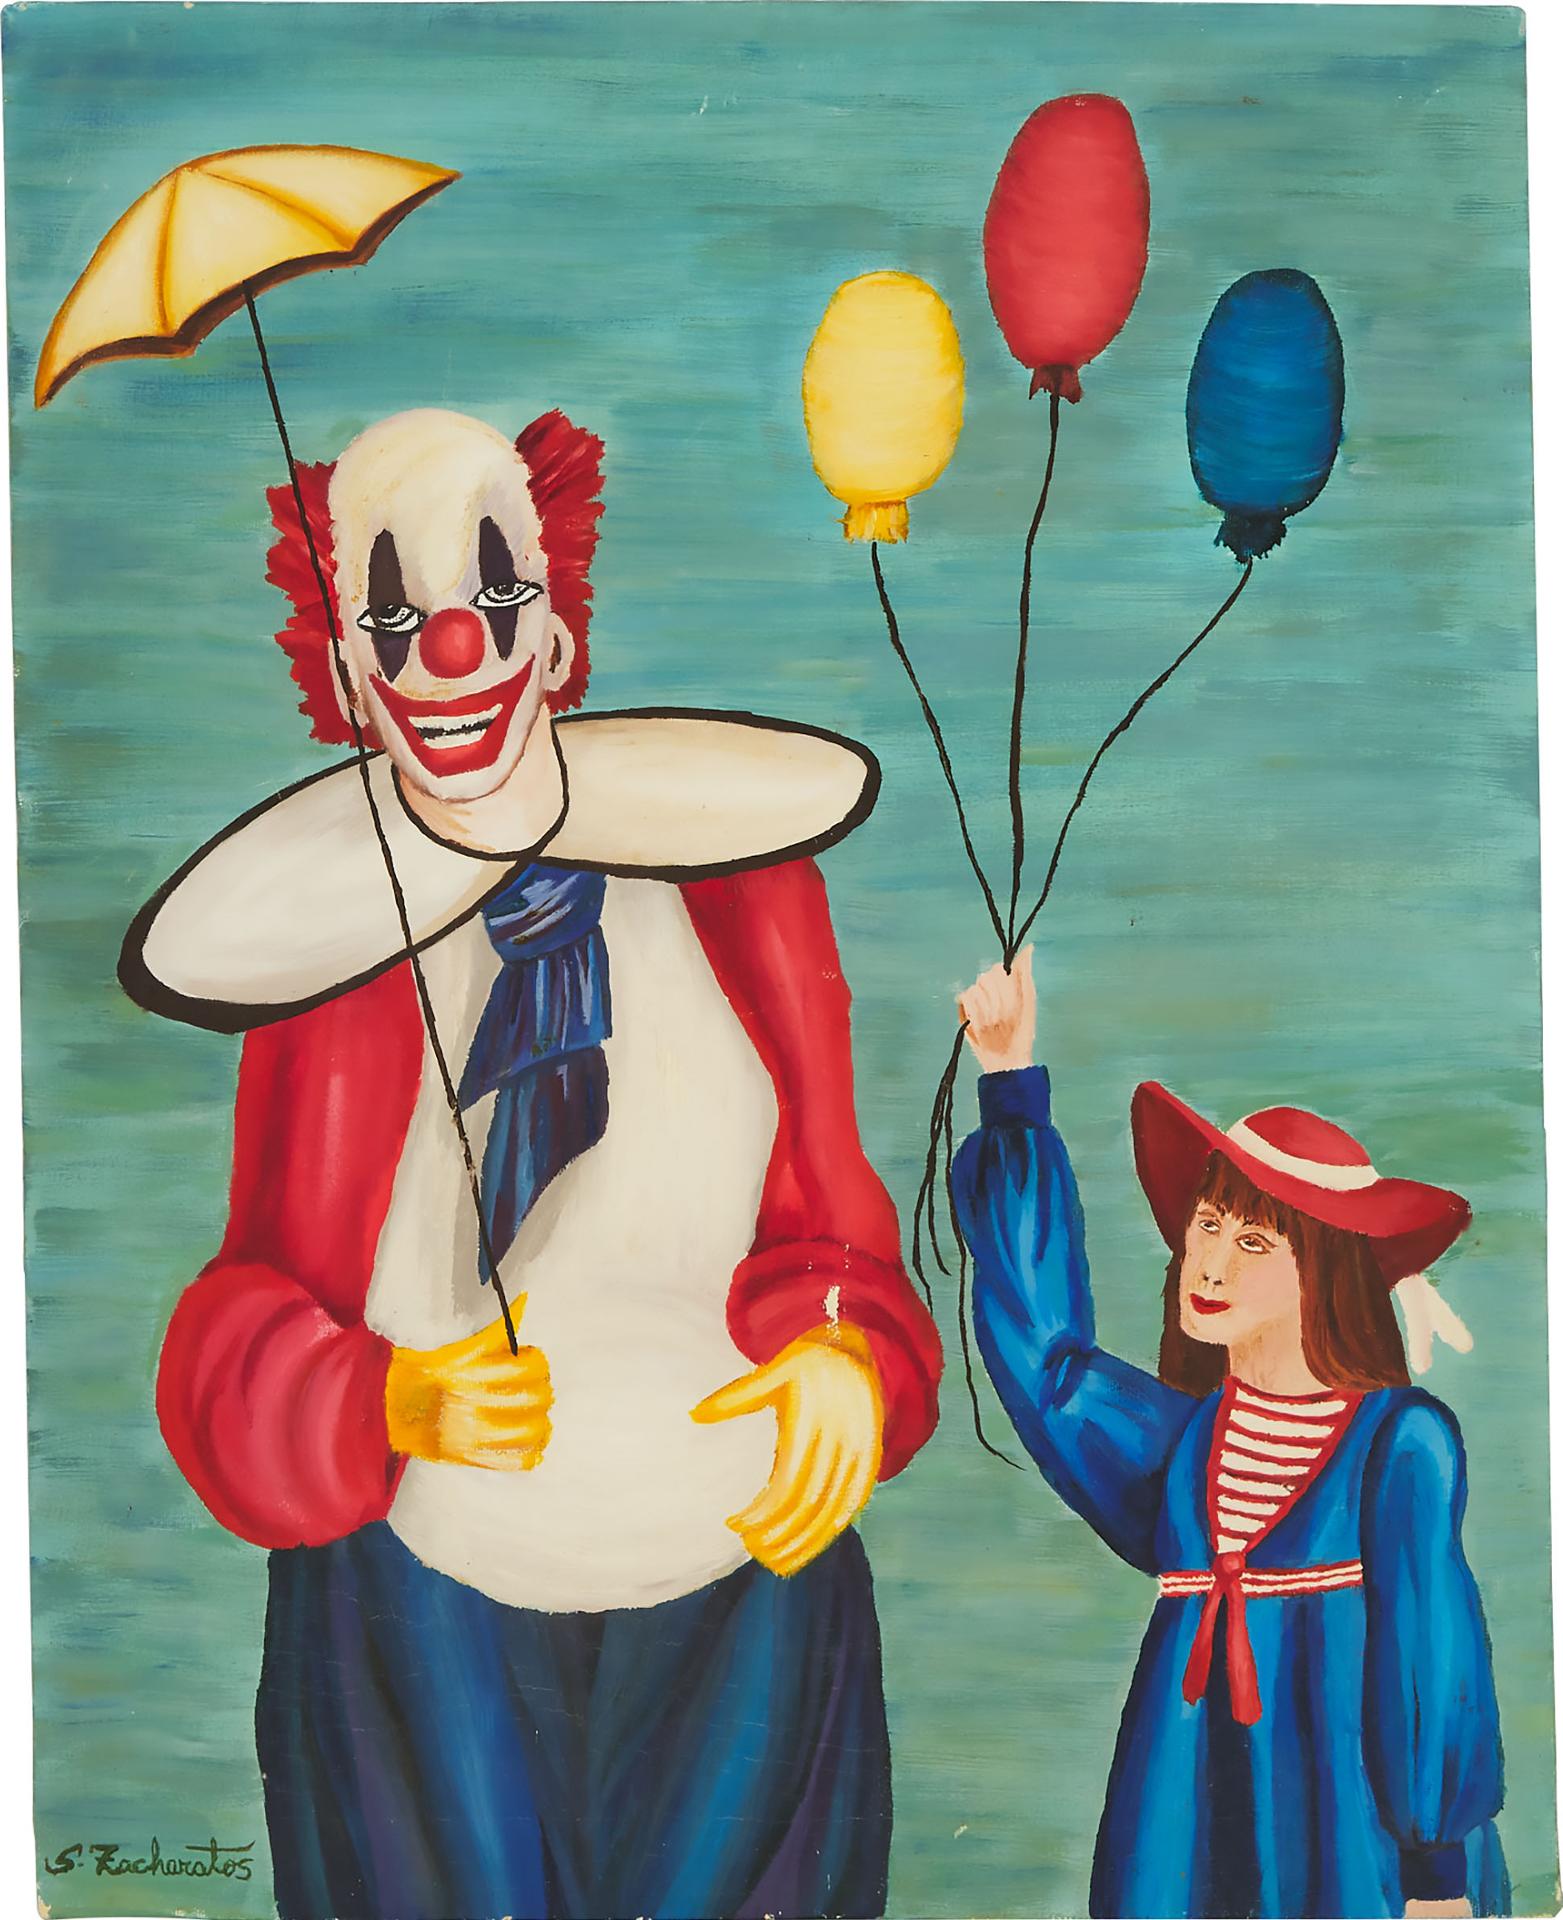 Stacey Zacharatos - A Clown With Girl Holding Balloons, 1982